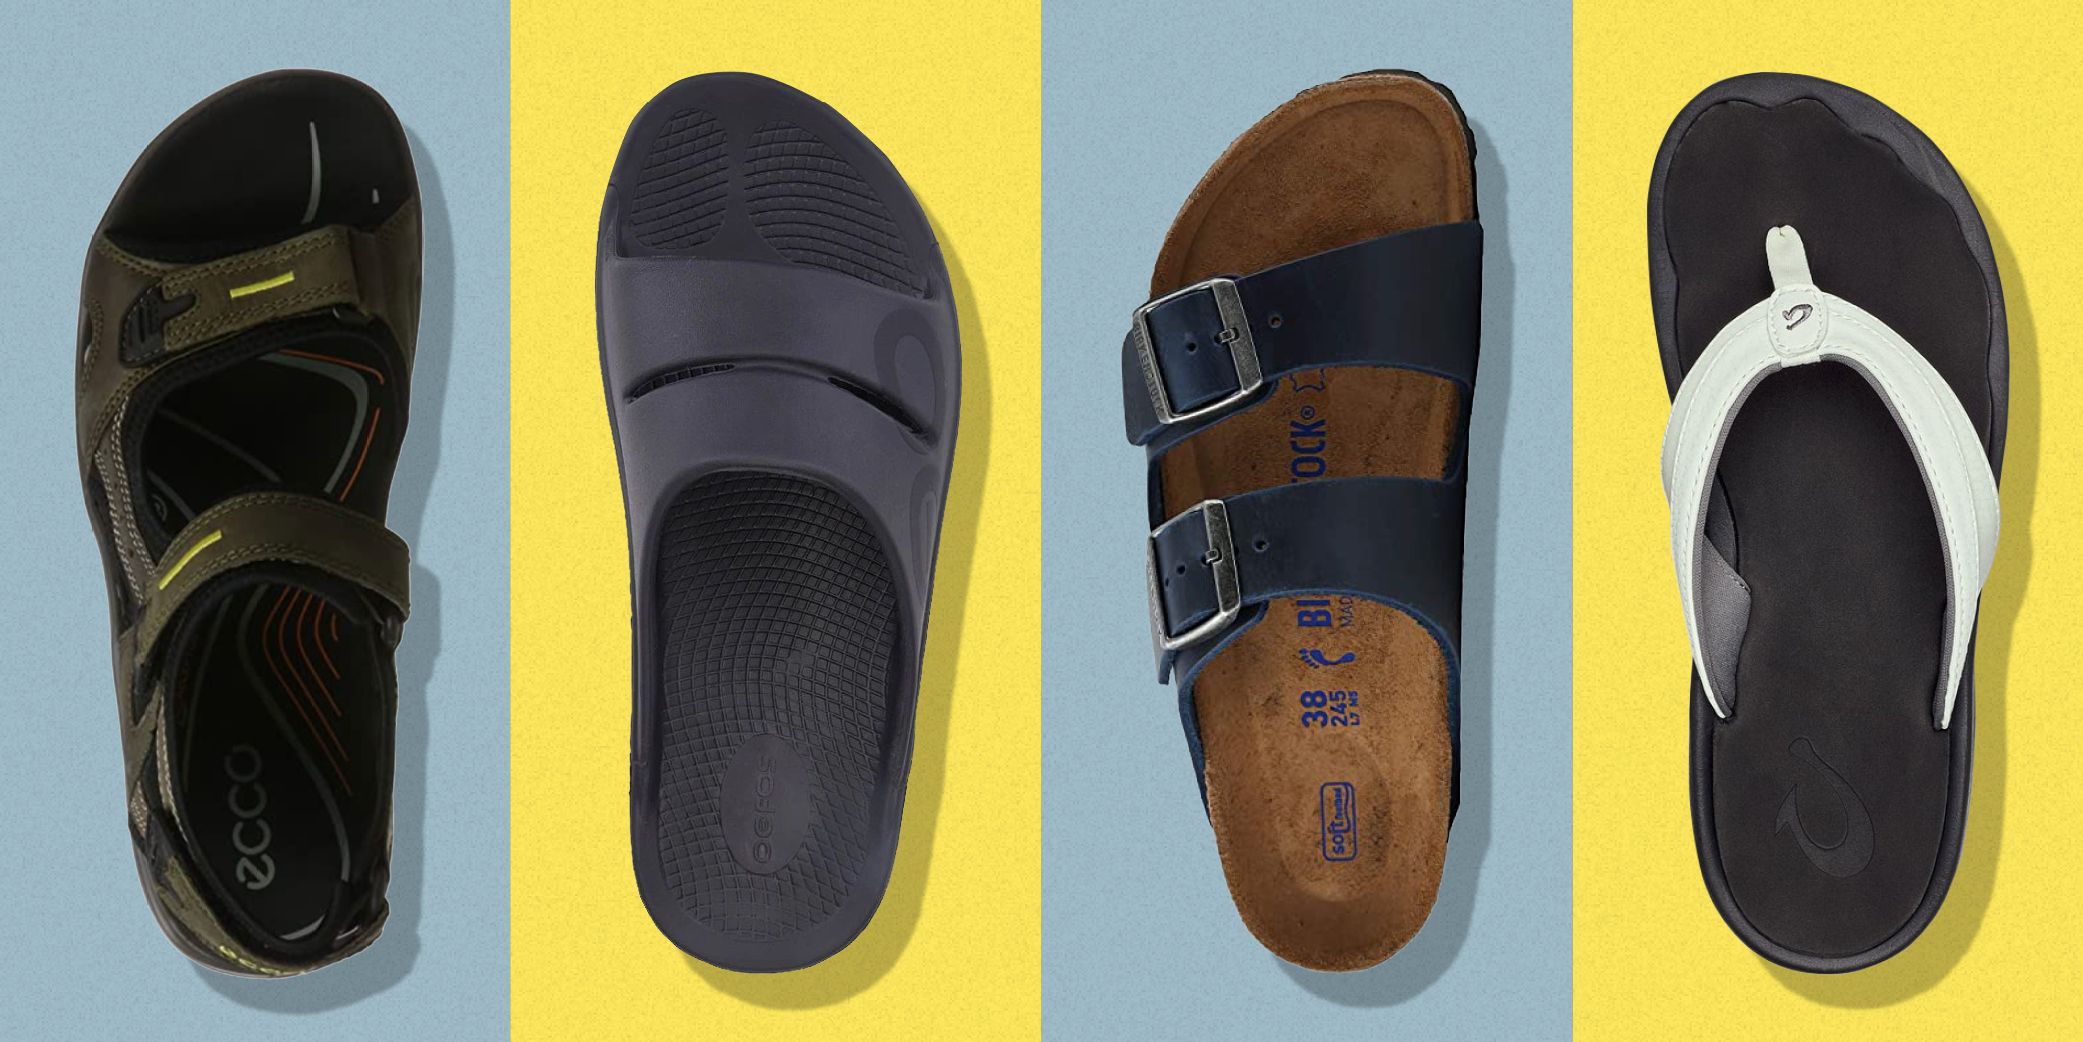 19 Best Sandals for Wide Feet Worth Packing This Summer